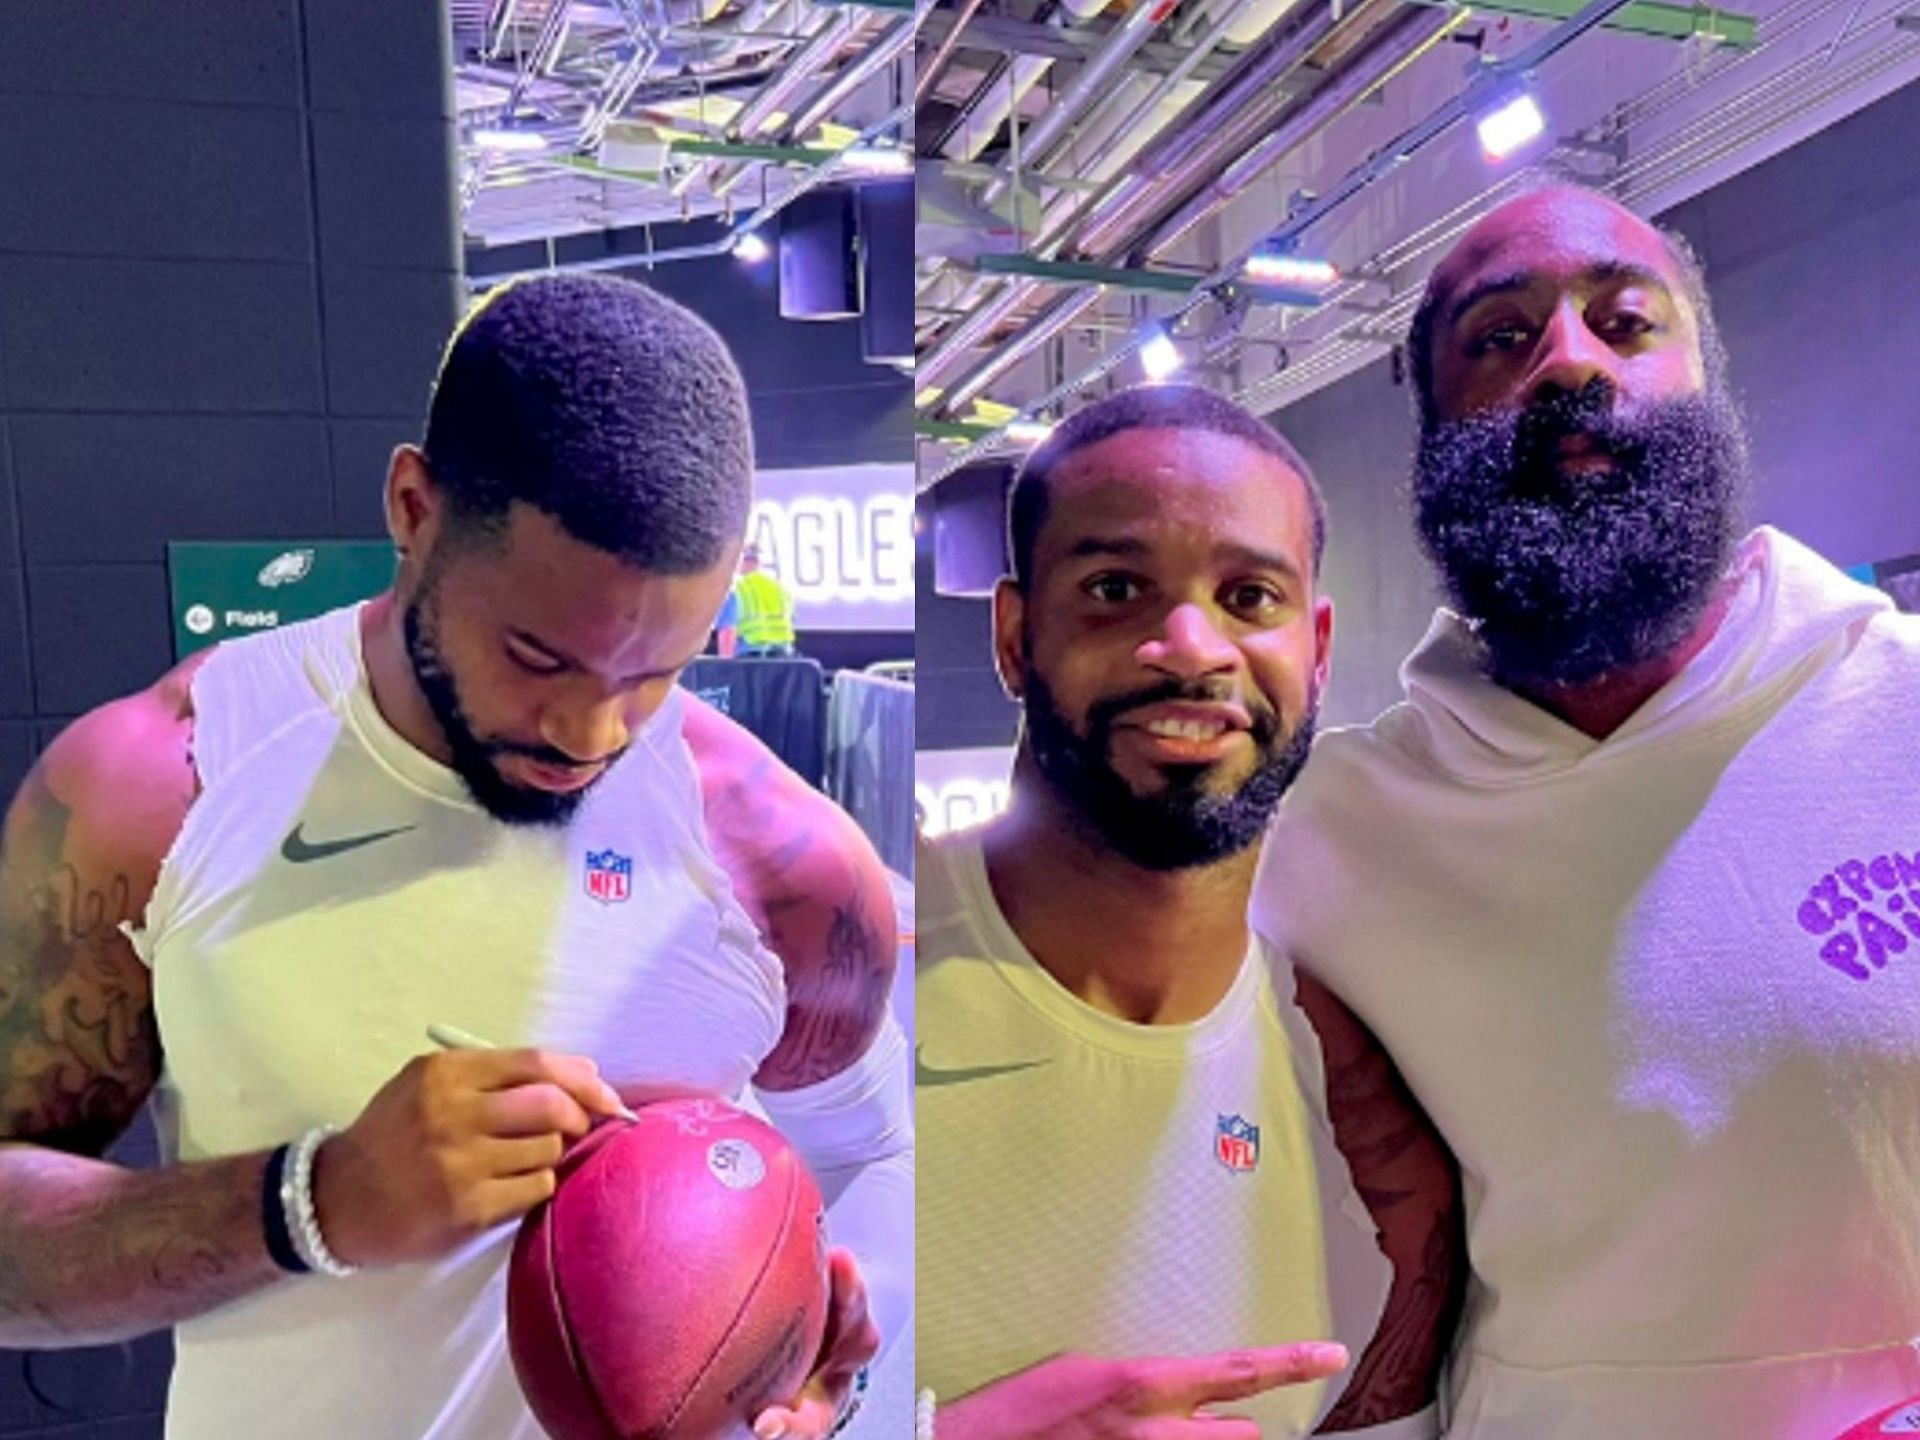 Darius Slay signs and gifts interception ball to James Harden - Courtesy of @JHarden13